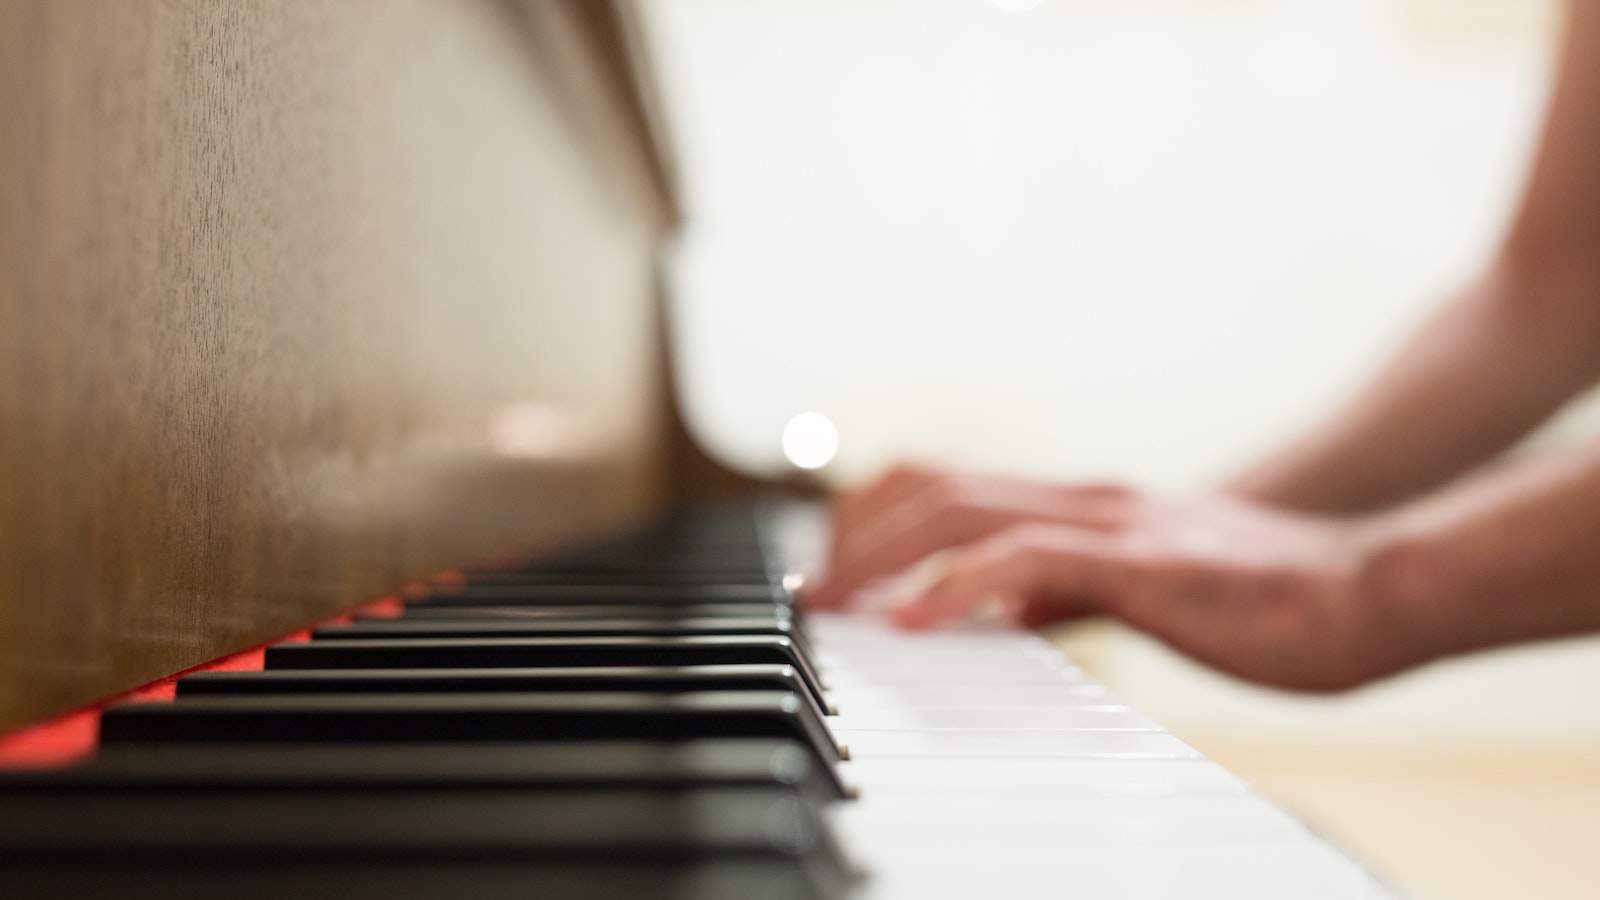 Learn to create and play beautiful melodies with these piano and composition courses for under $35